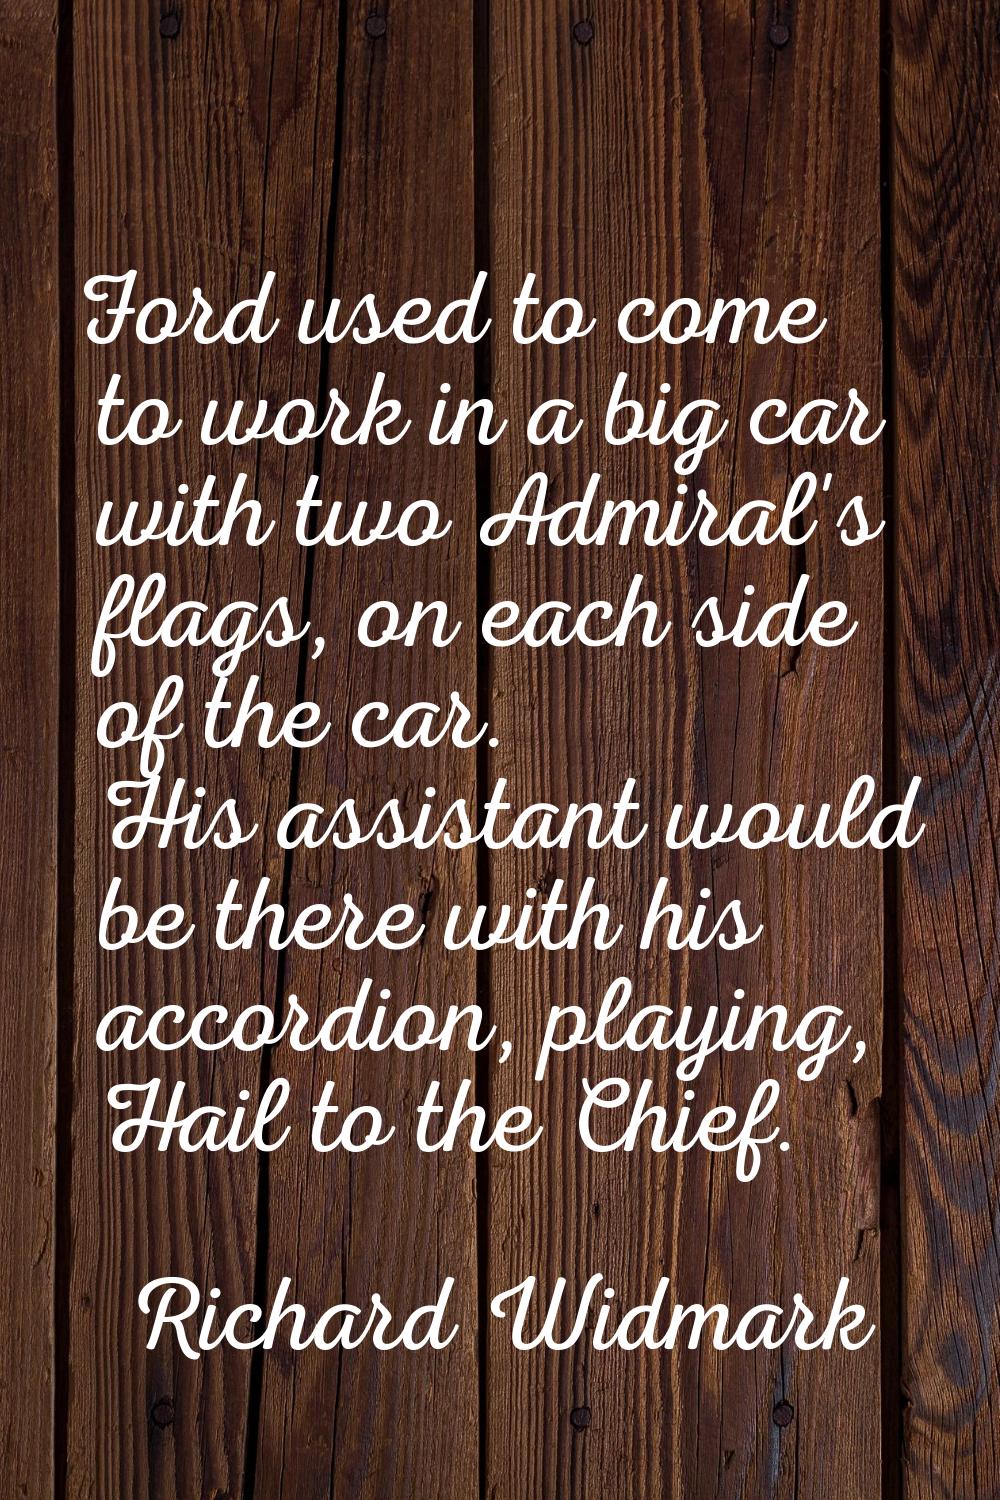 Ford used to come to work in a big car with two Admiral's flags, on each side of the car. His assis